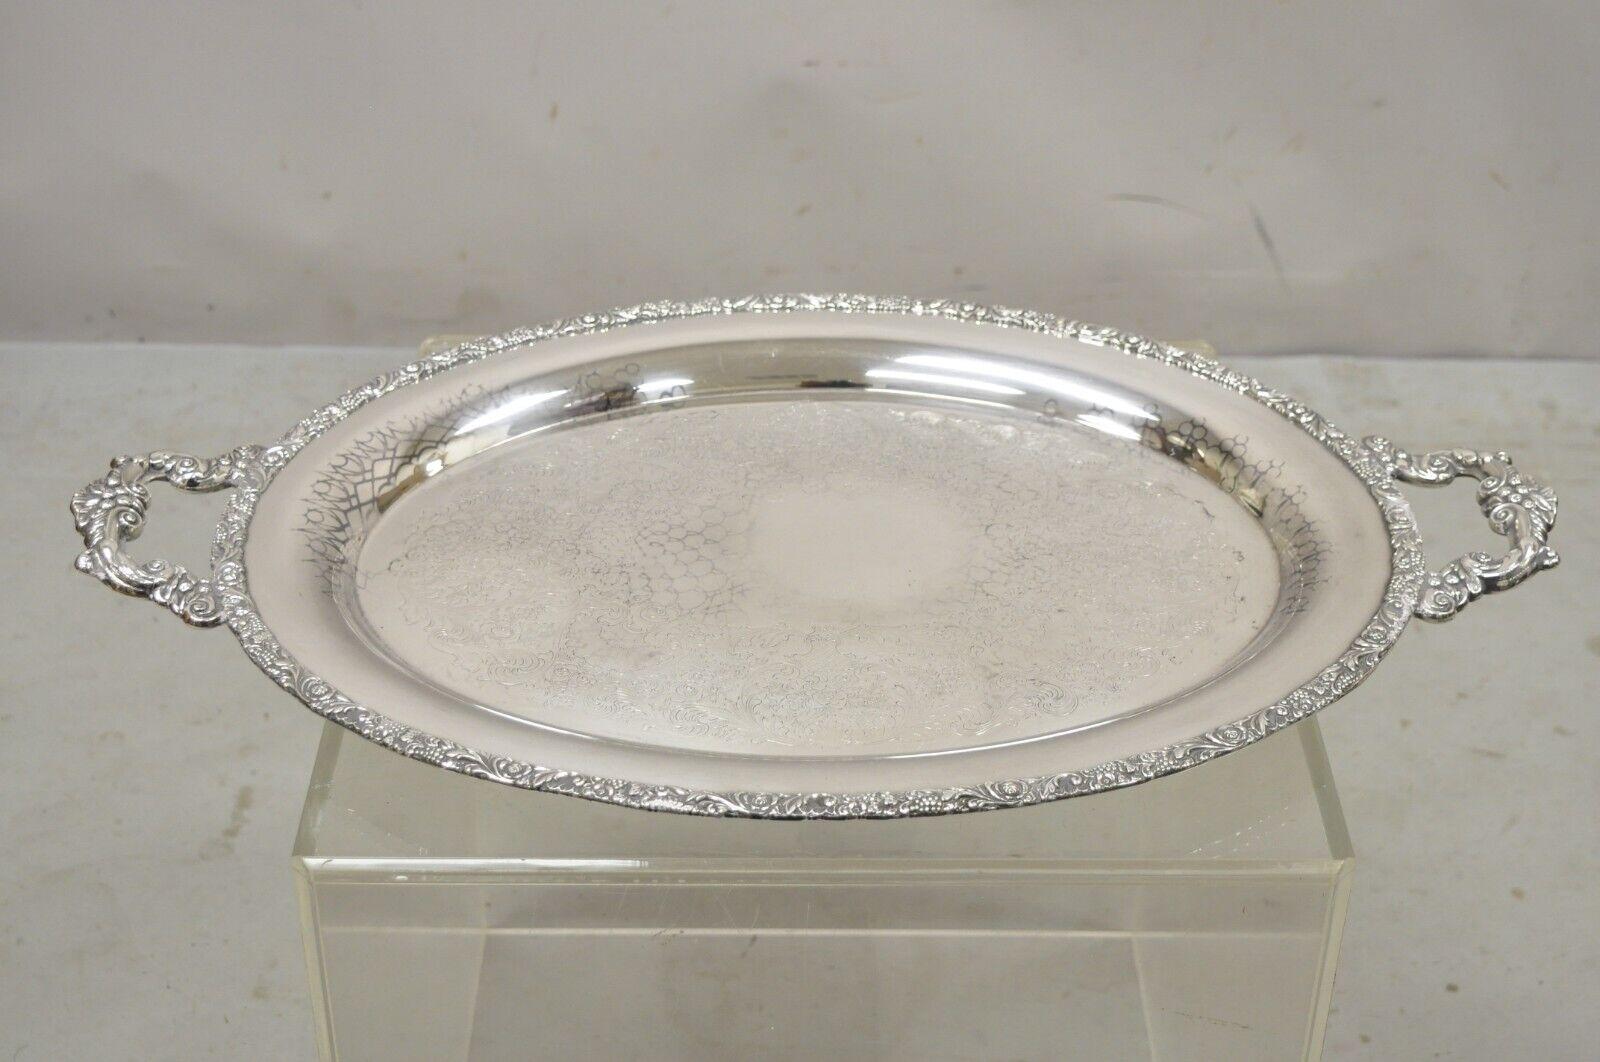 Vintage Webster Wilcox International Silver Co. silver plated oval twin handle platter tray. Item features ornate twin handles, oval shape, ornate etched center, original labels, circa early to mid 1900s. Measurements: 1.5